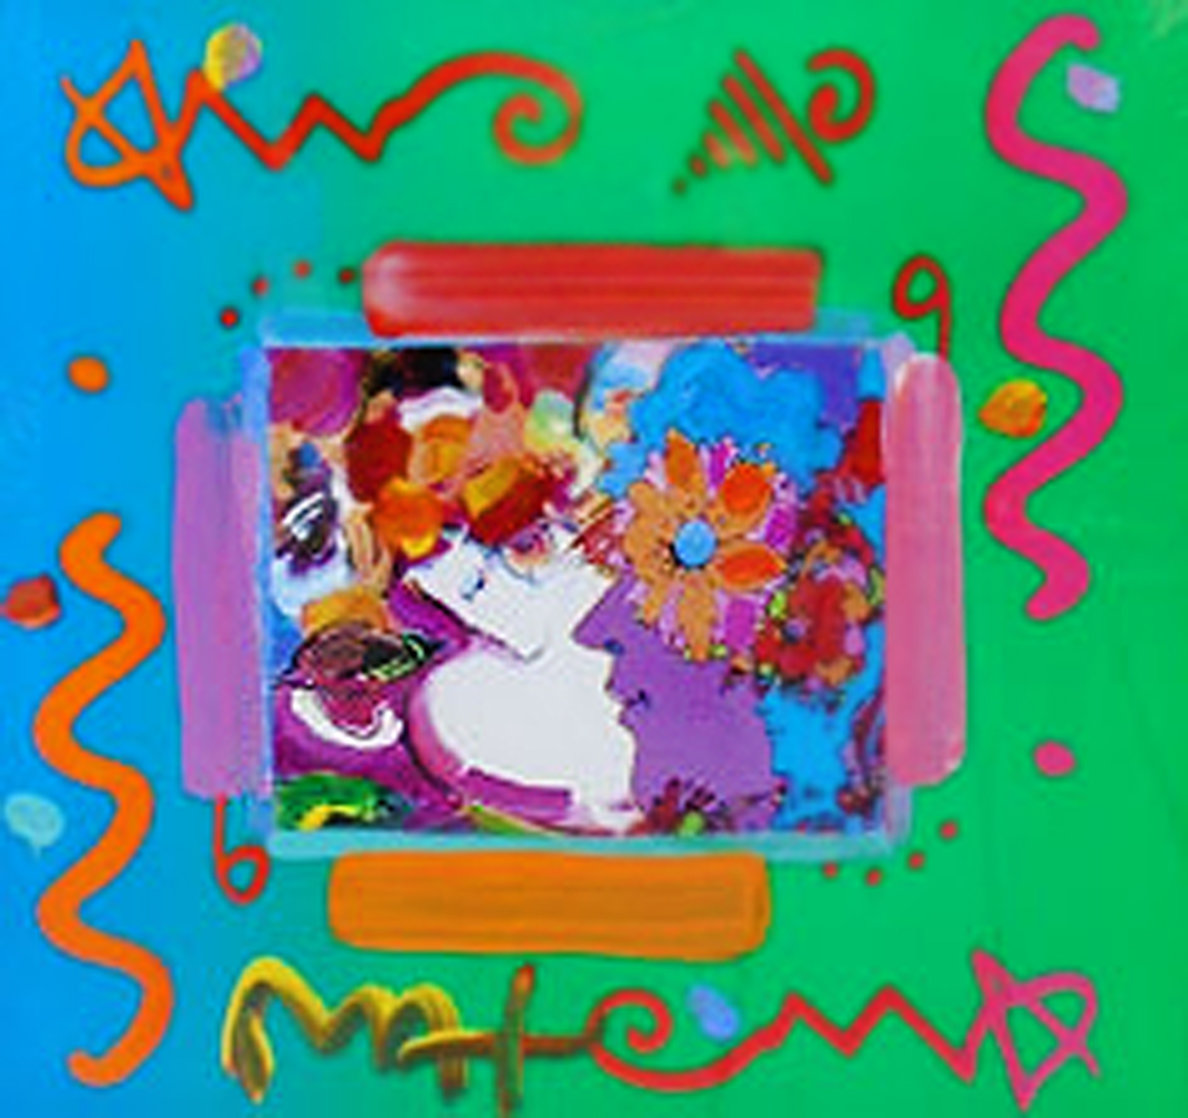 Flower Blossom Lady Collage Unique  2000 12x14 Works on Paper (not prints) by Peter Max